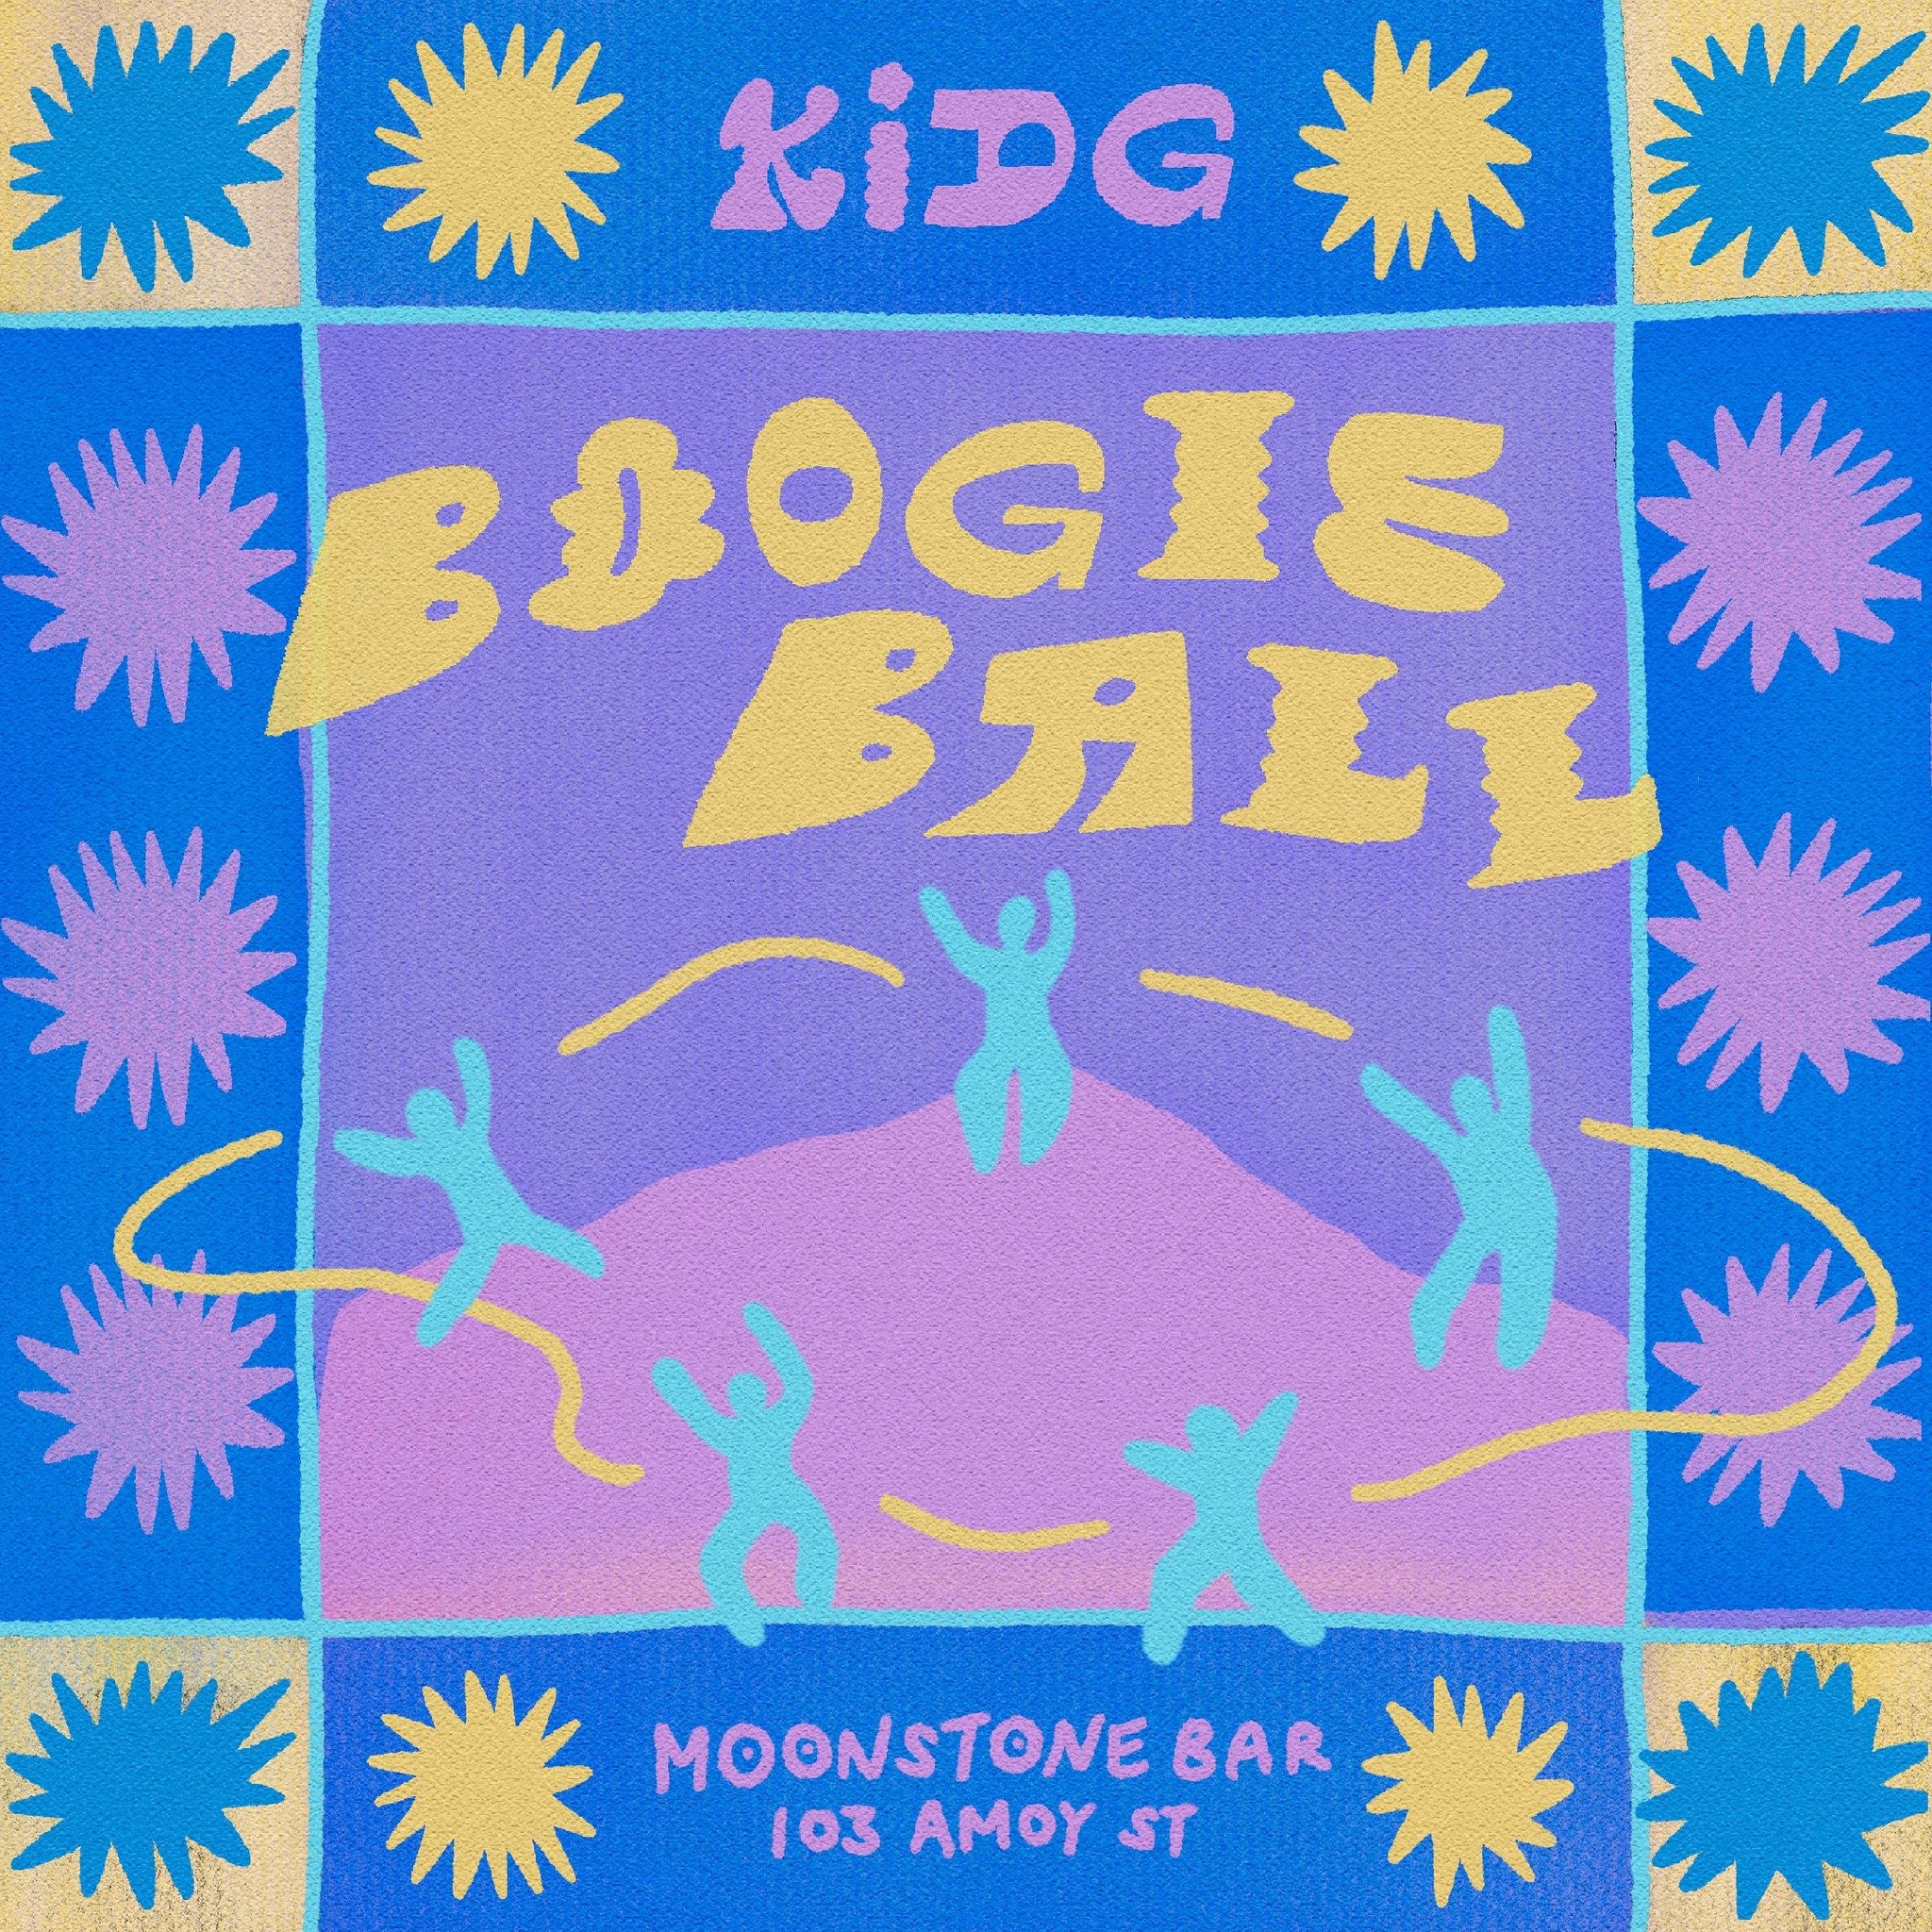 All sorts of throwback pop hits in this May&rsquo;s Boogie Ball with @kkkidggg 💥💥💥

Free entry as long as you promise to boogie 🪩😉

Wed 8 May
8pm to 12mn
Moonstone Bar (Telok Ayer MRT)